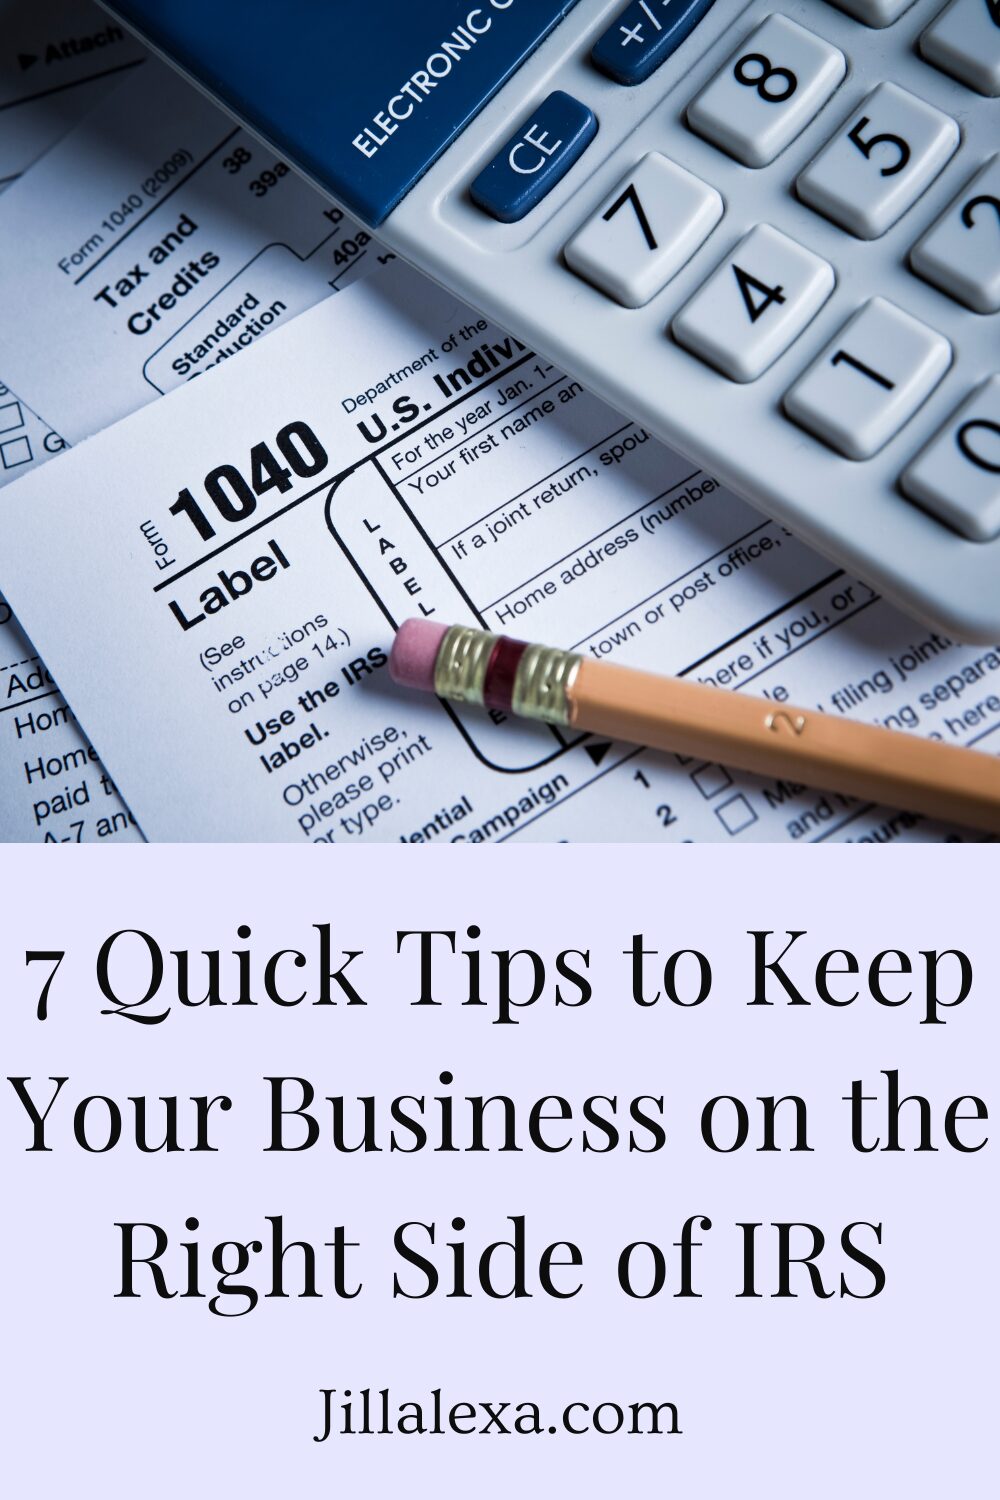 7 Quick Tips to Keep Your Business on the Right Side of IRS